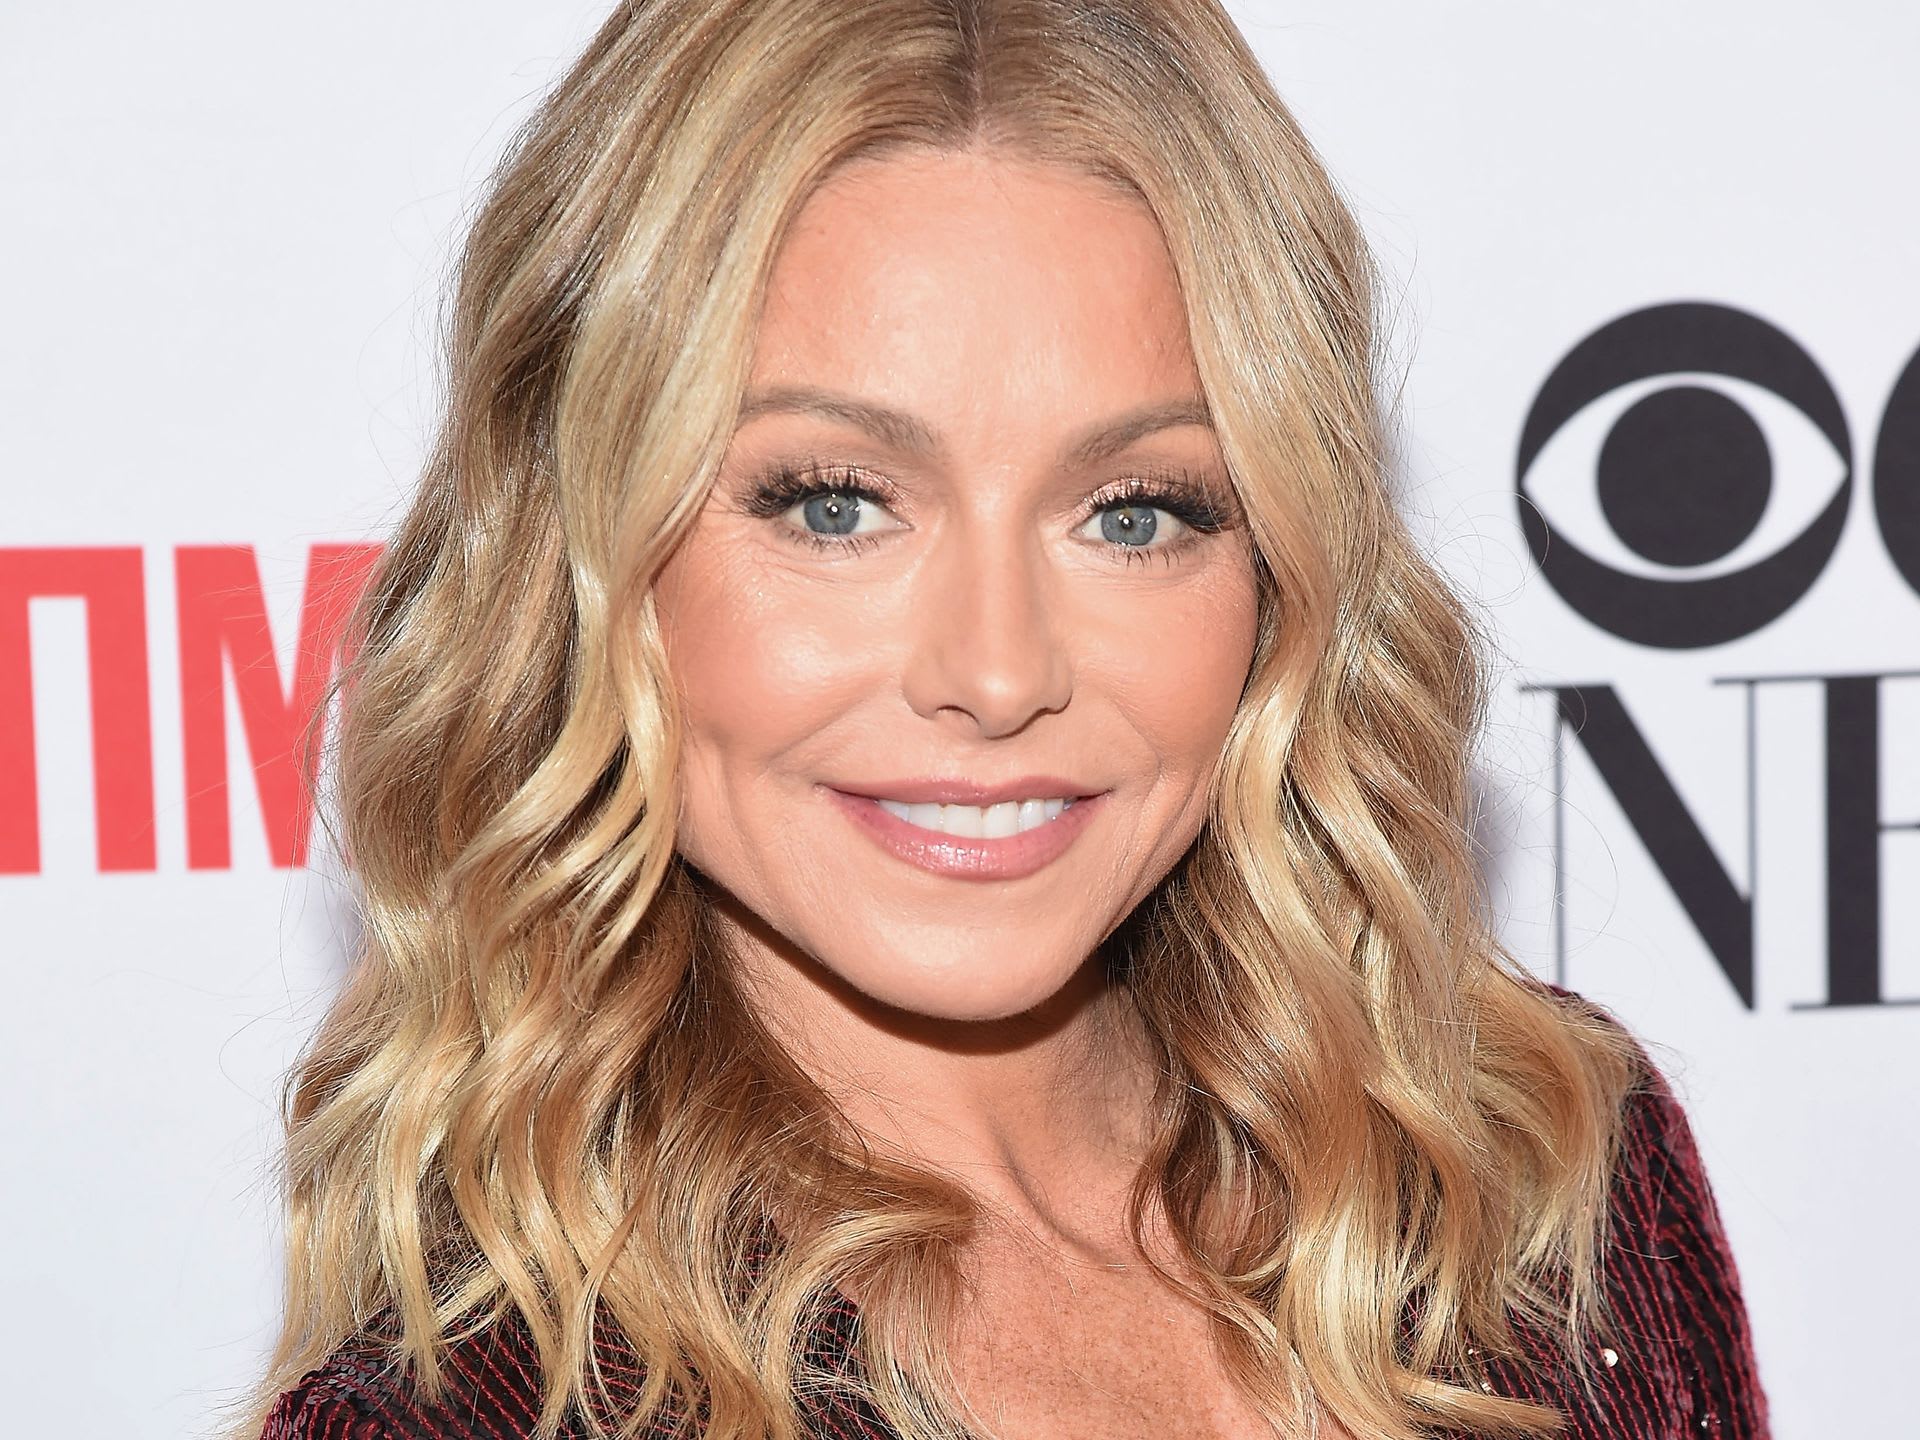 Did Kelly Ripa Undergo Plastic Surgery? Body Measurements and More!